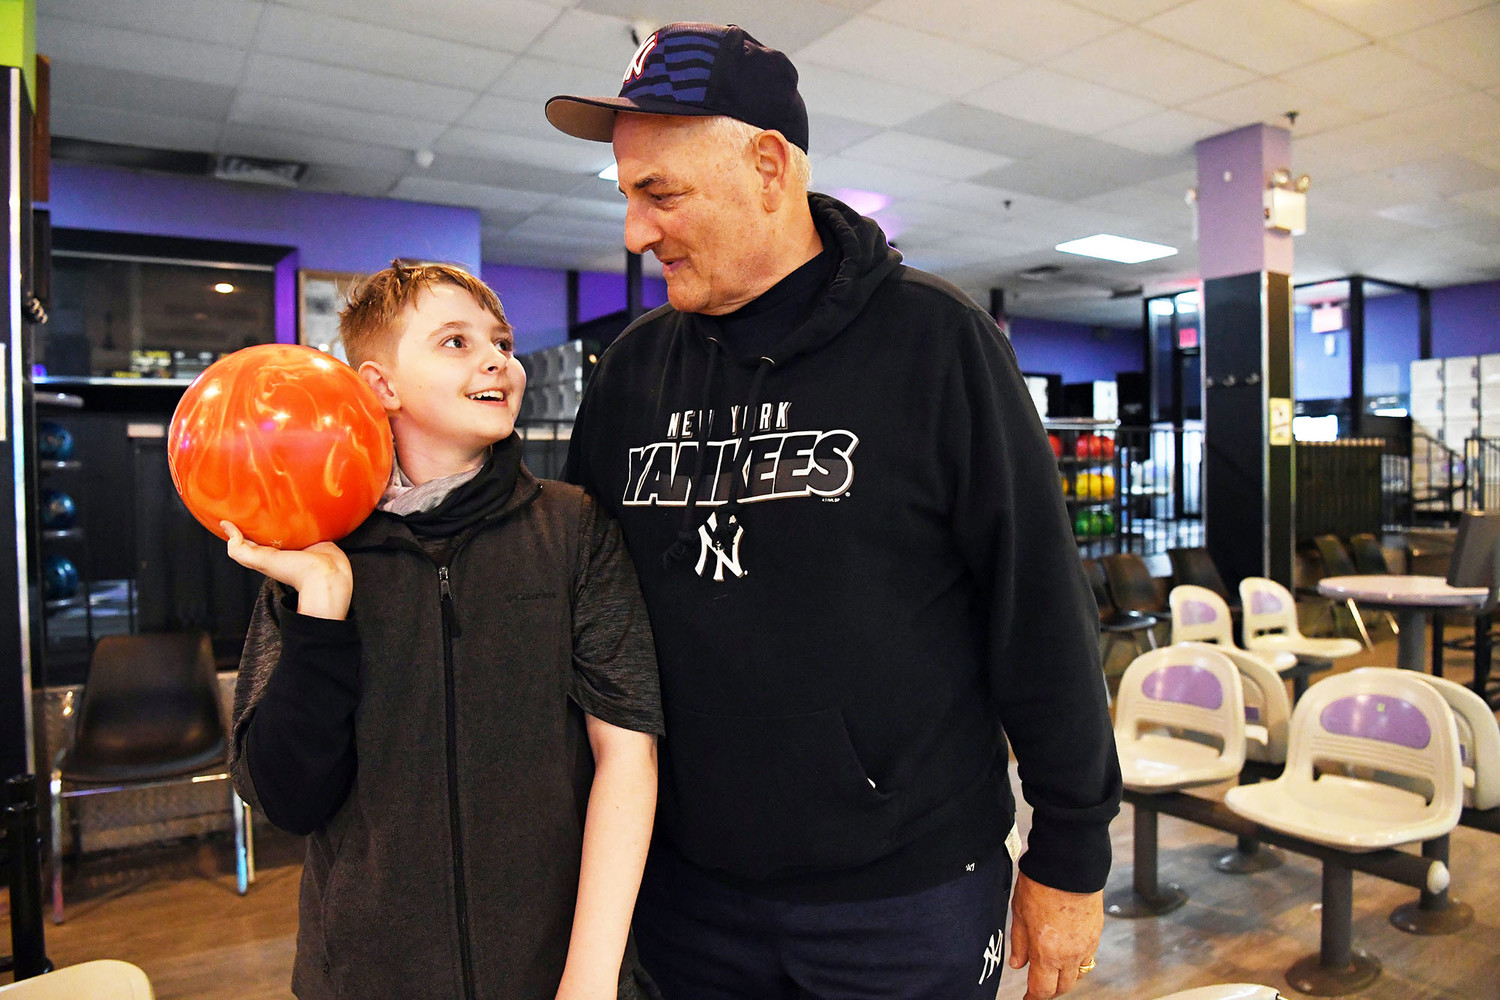 Jack Harkin, a sixth-grader at Intermediate School 24 on Staten Island, smiles with his grandfather Larry Ambrosino at Rab’s Country Lanes April 17. Harkin, who started bowling last year, looks forward to spending time with his grandfather each Tuesday as he competes in the Staten Island CYO bowling league.